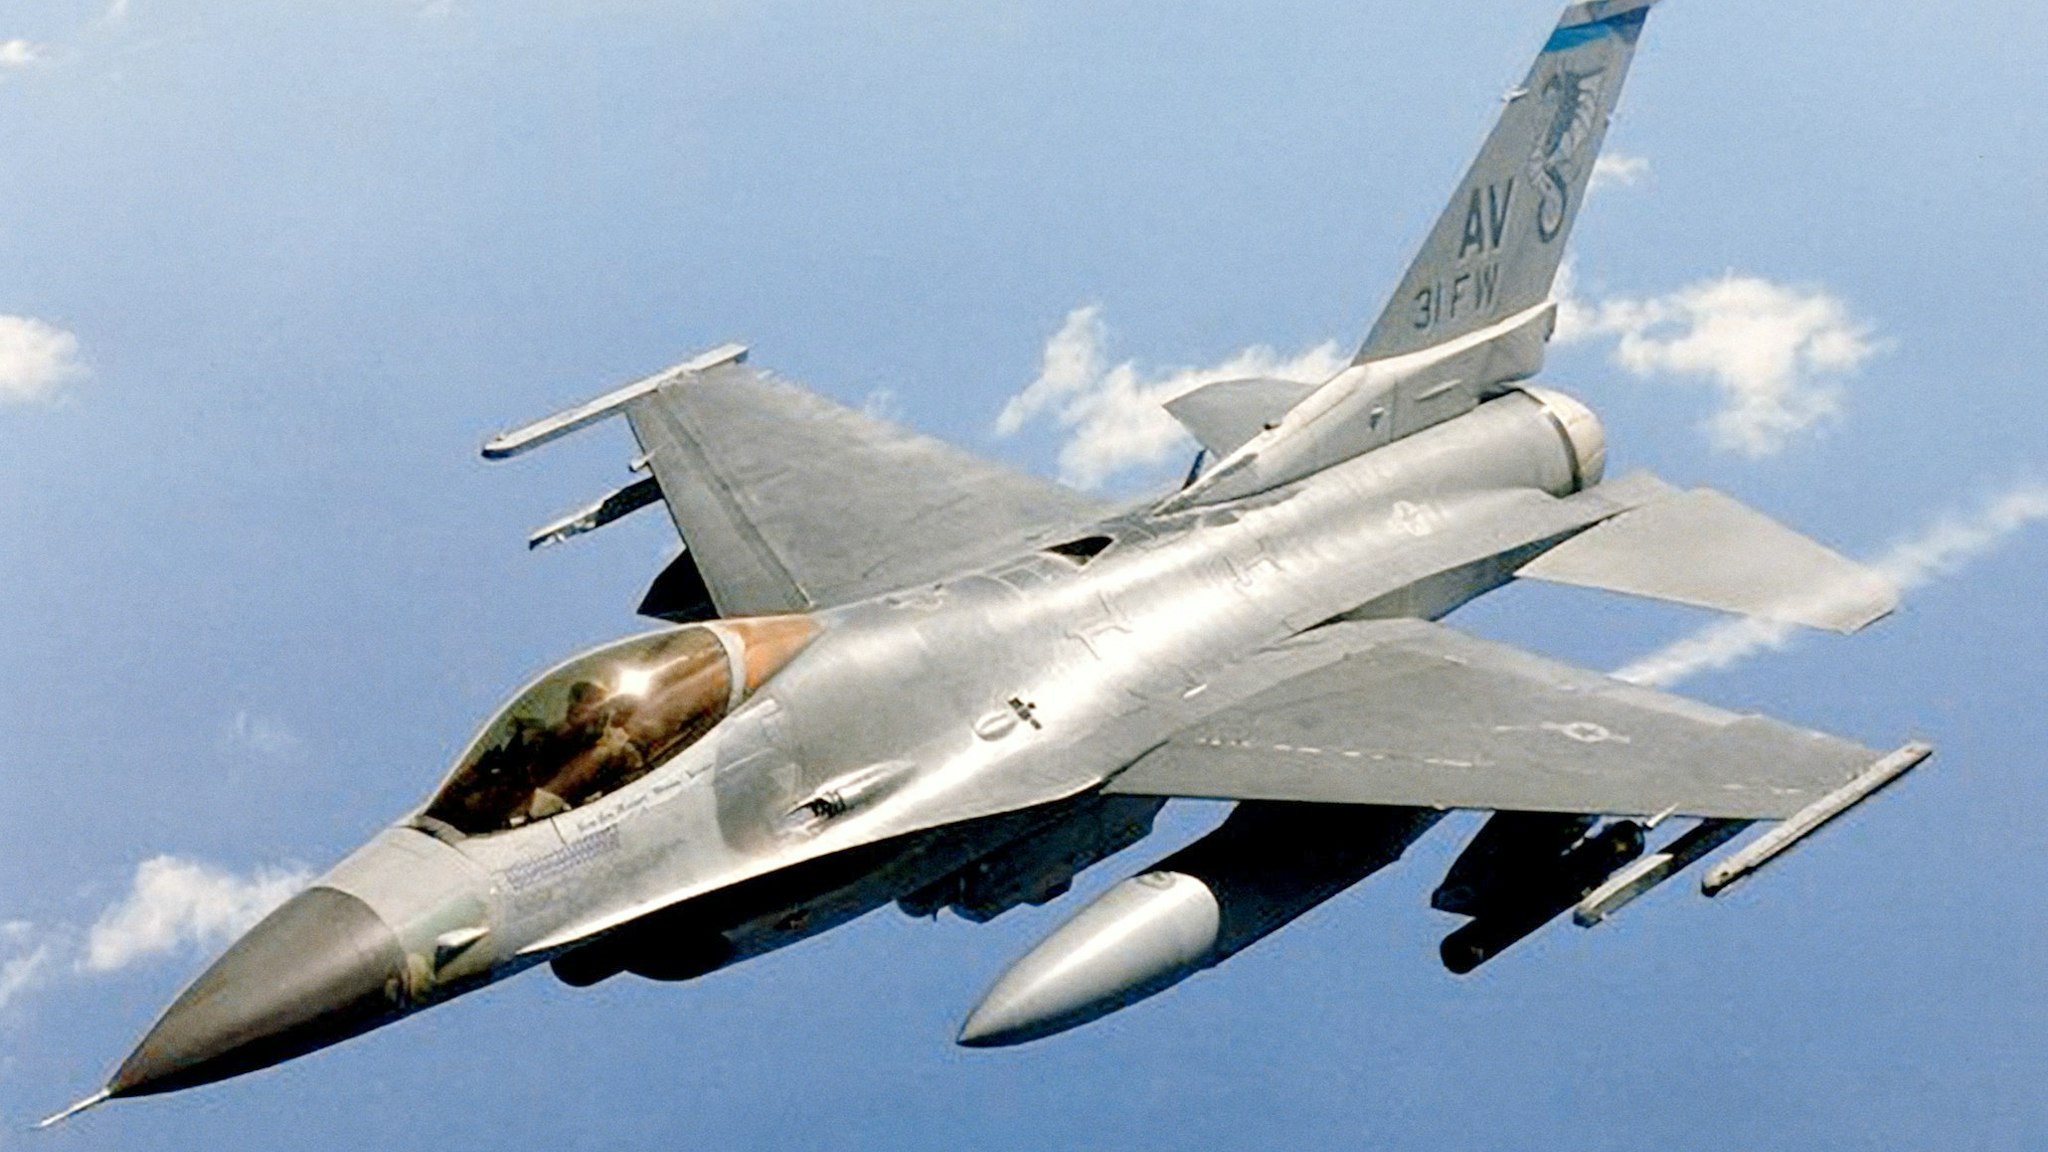 General Dynamics F-16 Falcon in flight during combat mission